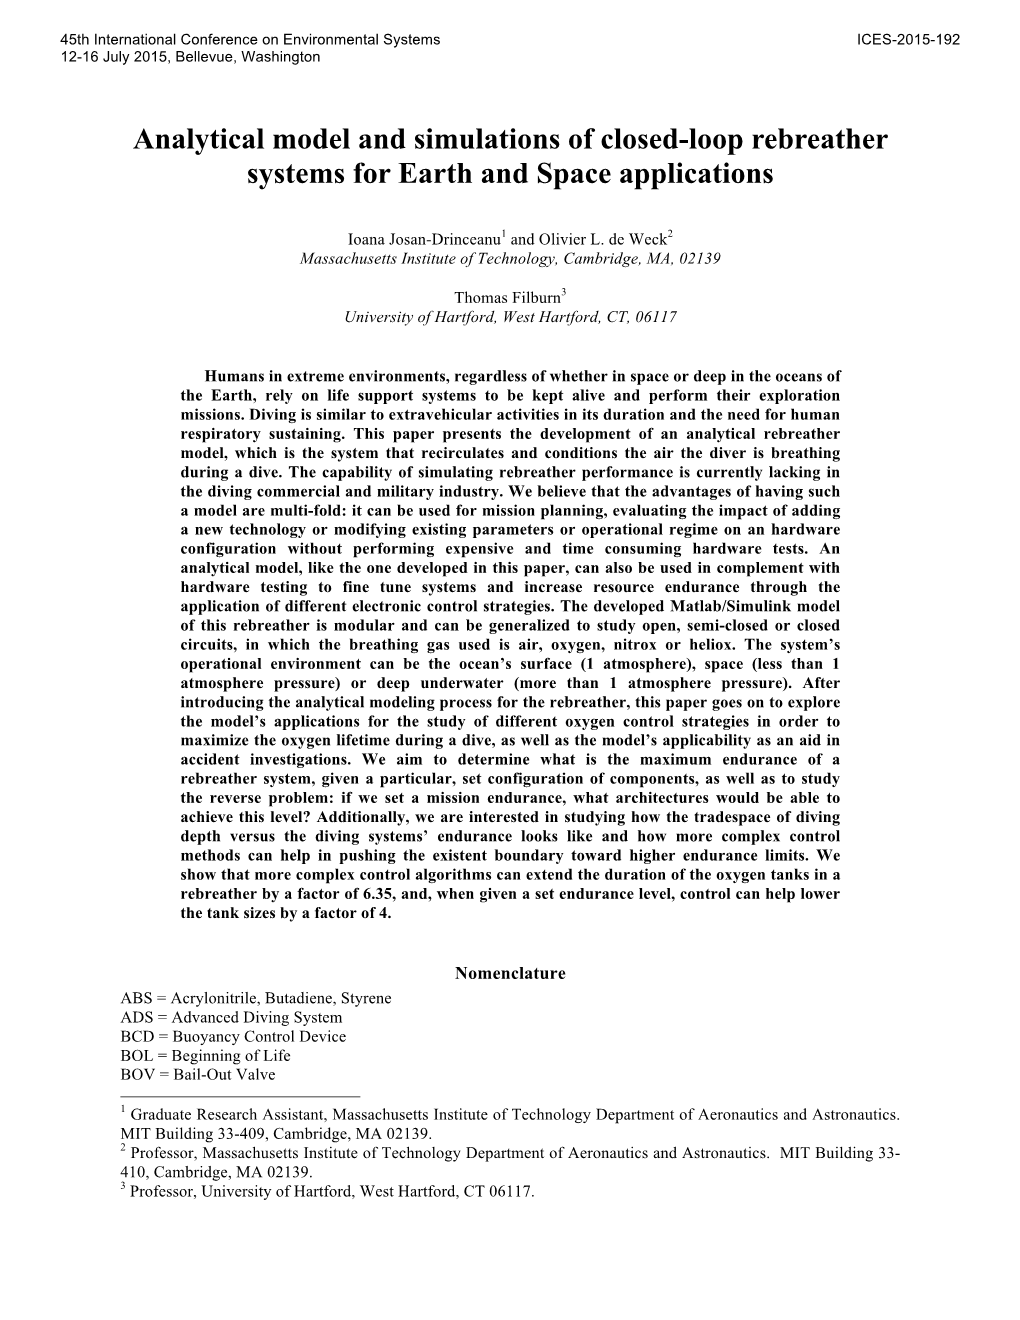 Analytical Model and Simulations of Closed-Loop Rebreather Systems for Earth and Space Applications